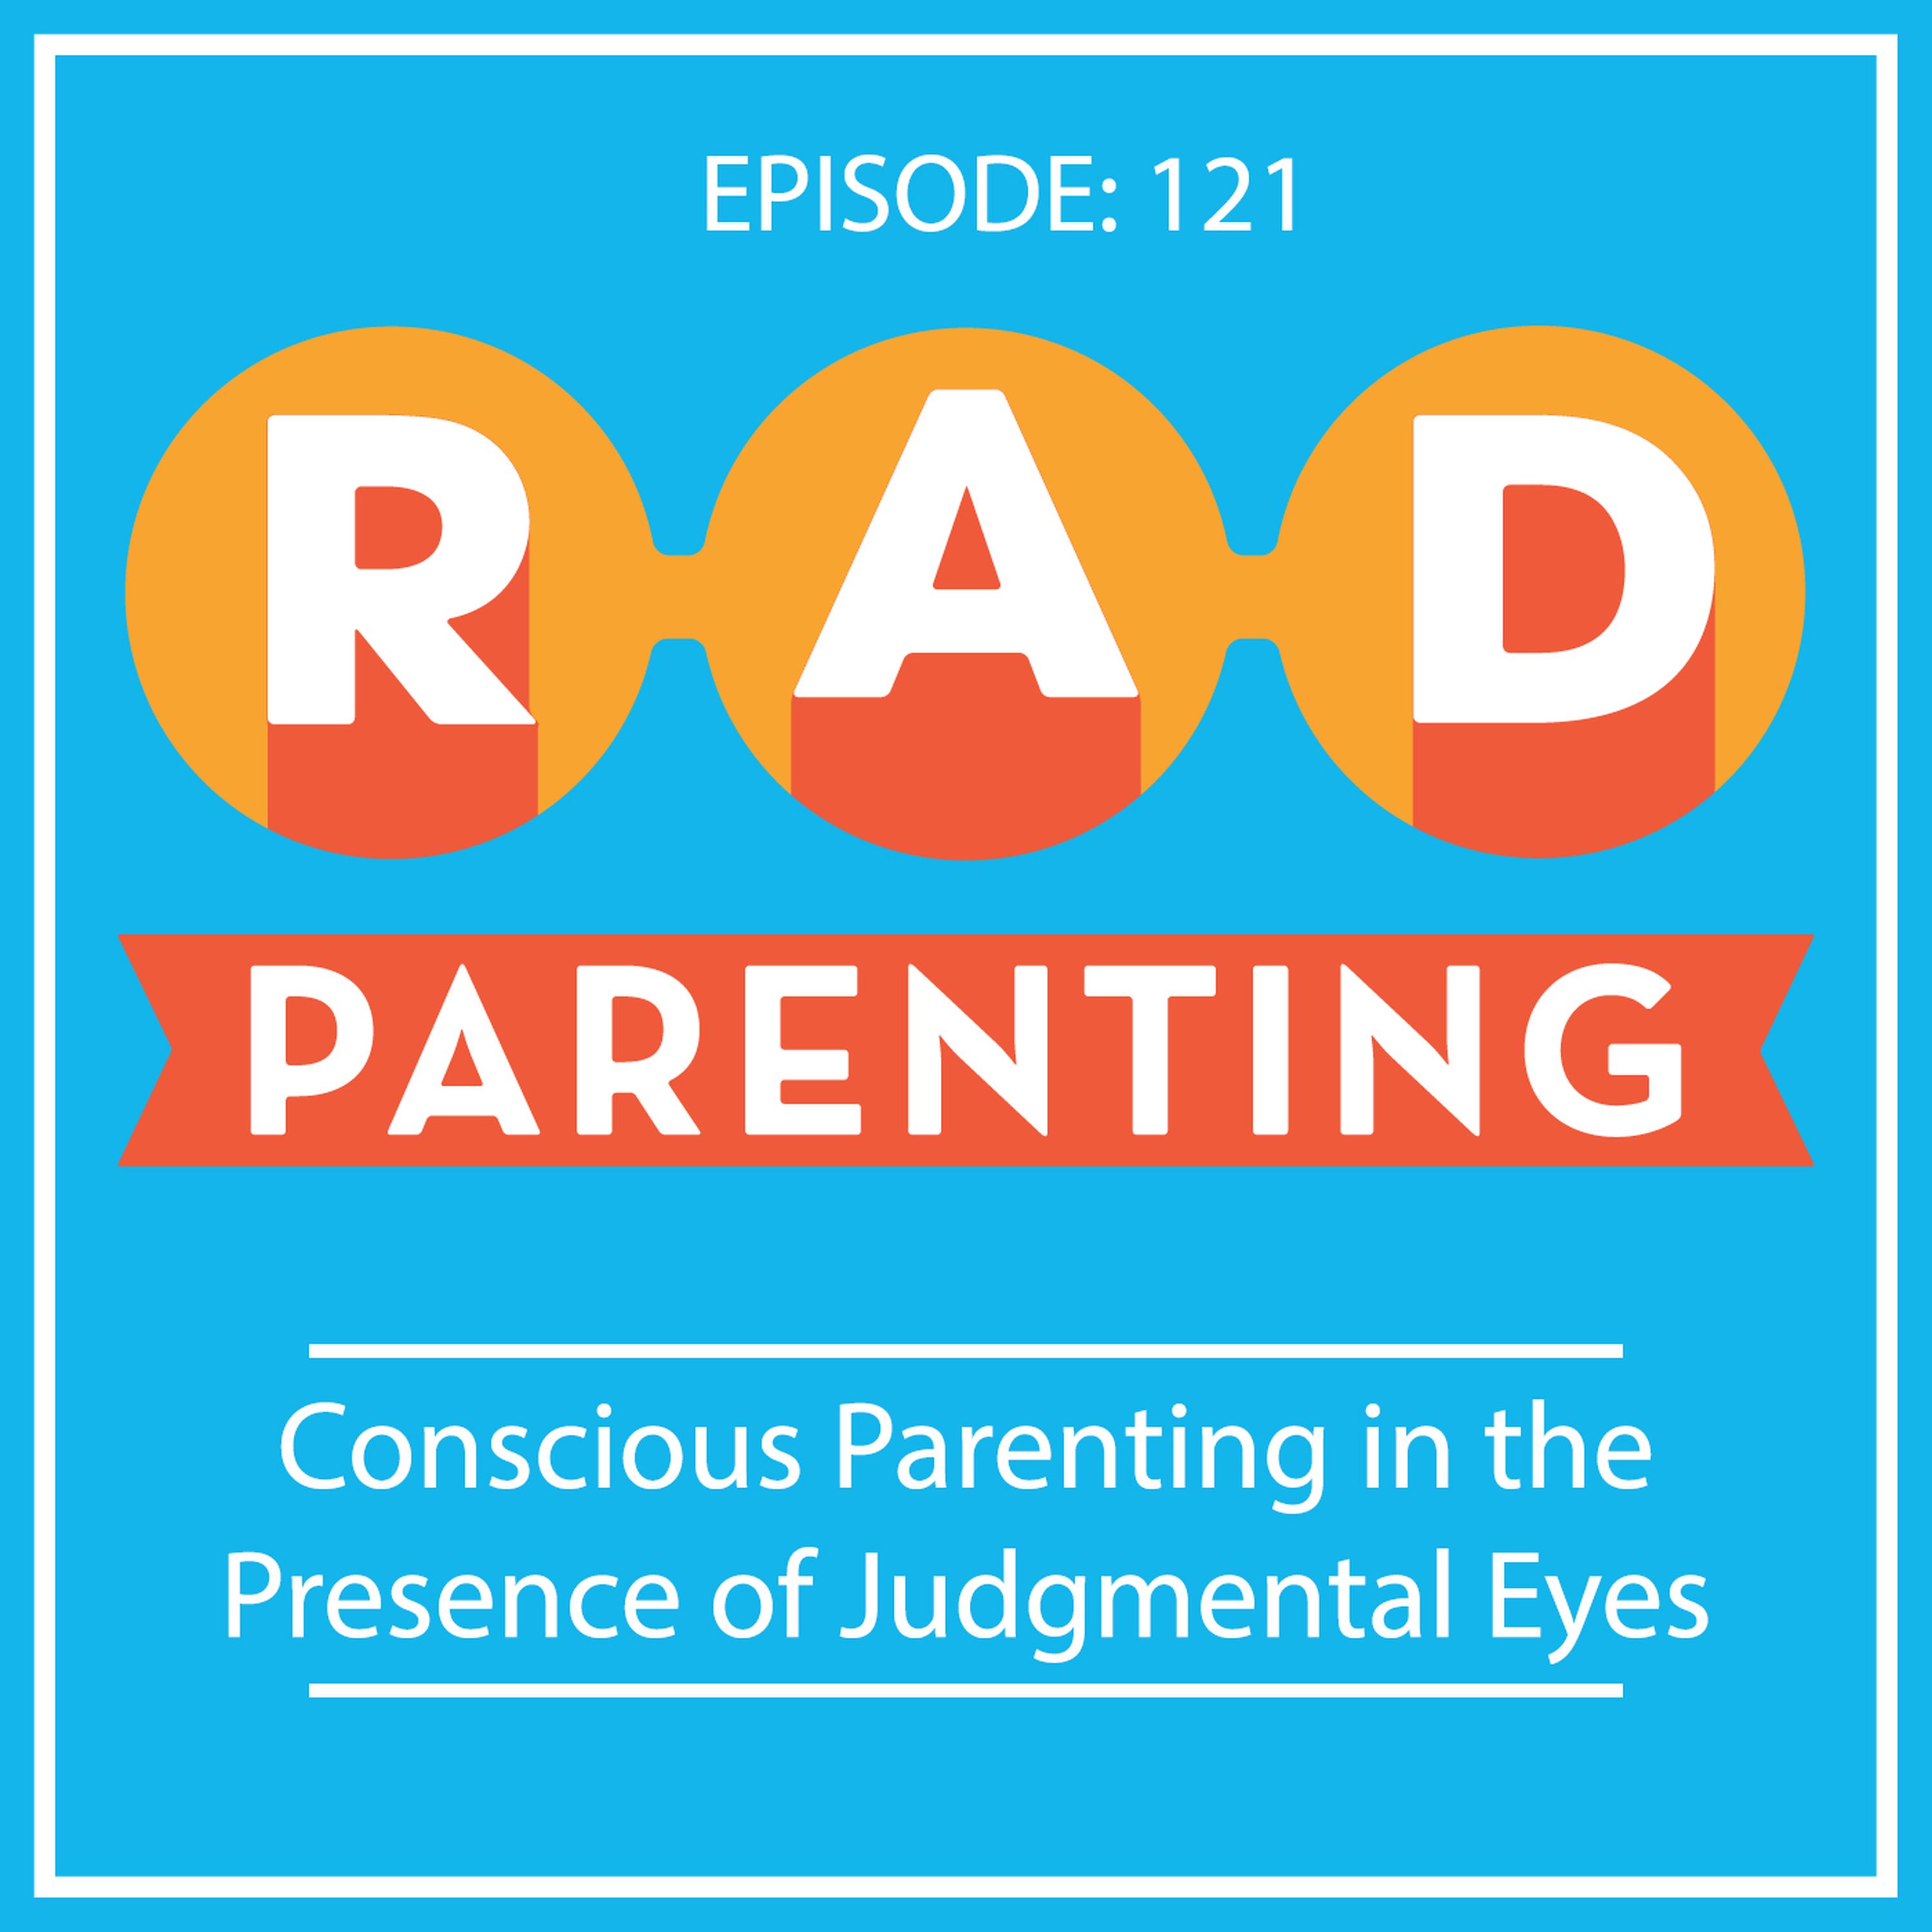 Conscious Parenting in the Presence of Judgmental Eyes